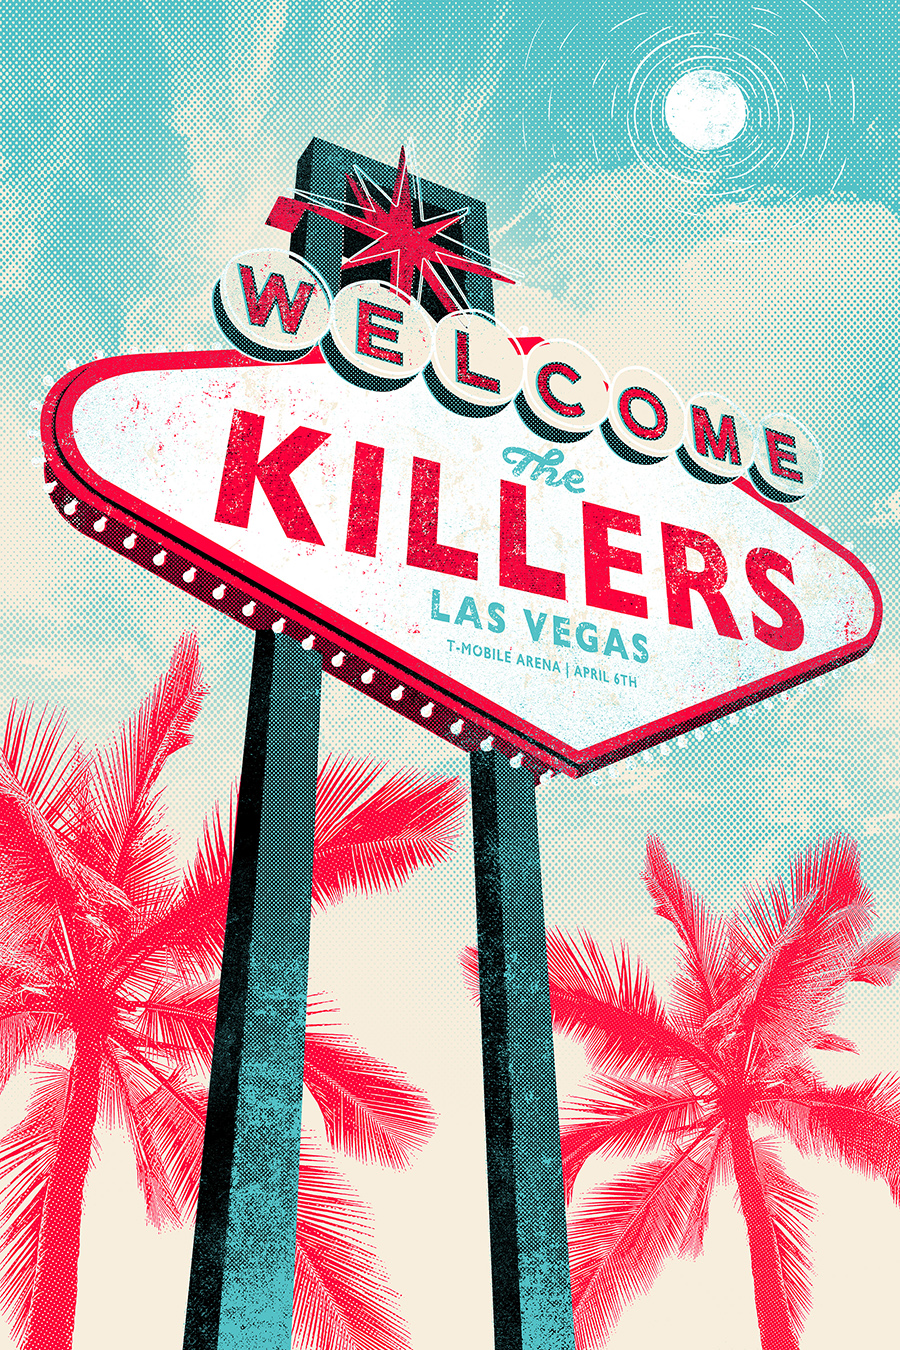 The Killers gig poster